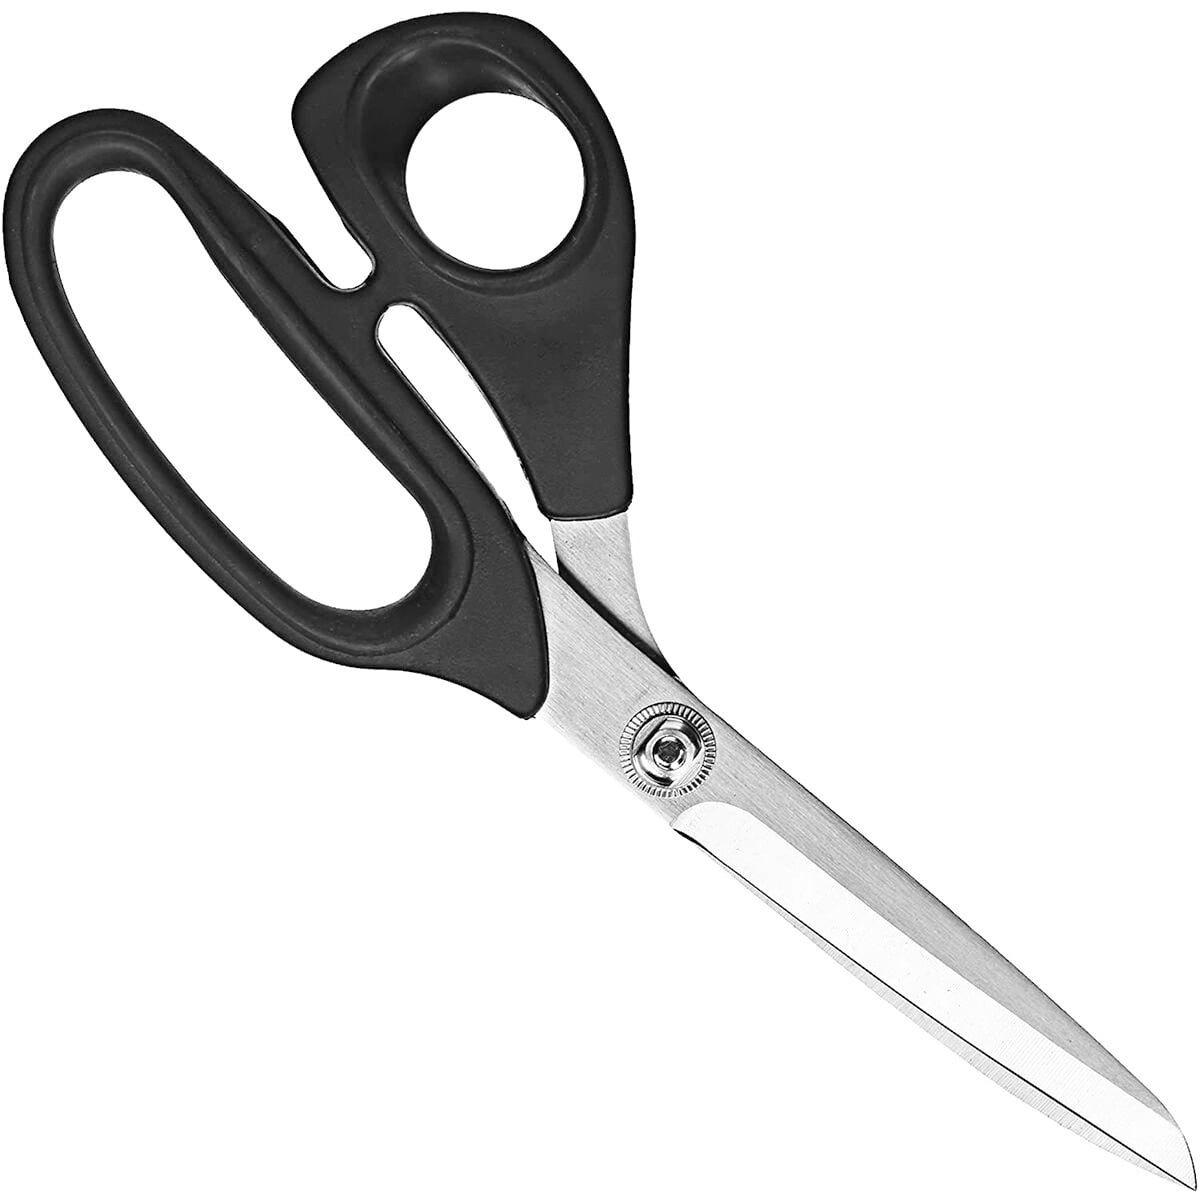  CINKCO 8.0 inch Professional Sewing Scissors Heavy Duty 65Mn  Forged Alloy Steel Premium Household Office Shears Ultra Sharp for  Thickened Leather Fabric Cutting Dressmaking (Samll) : Arts, Crafts & Sewing